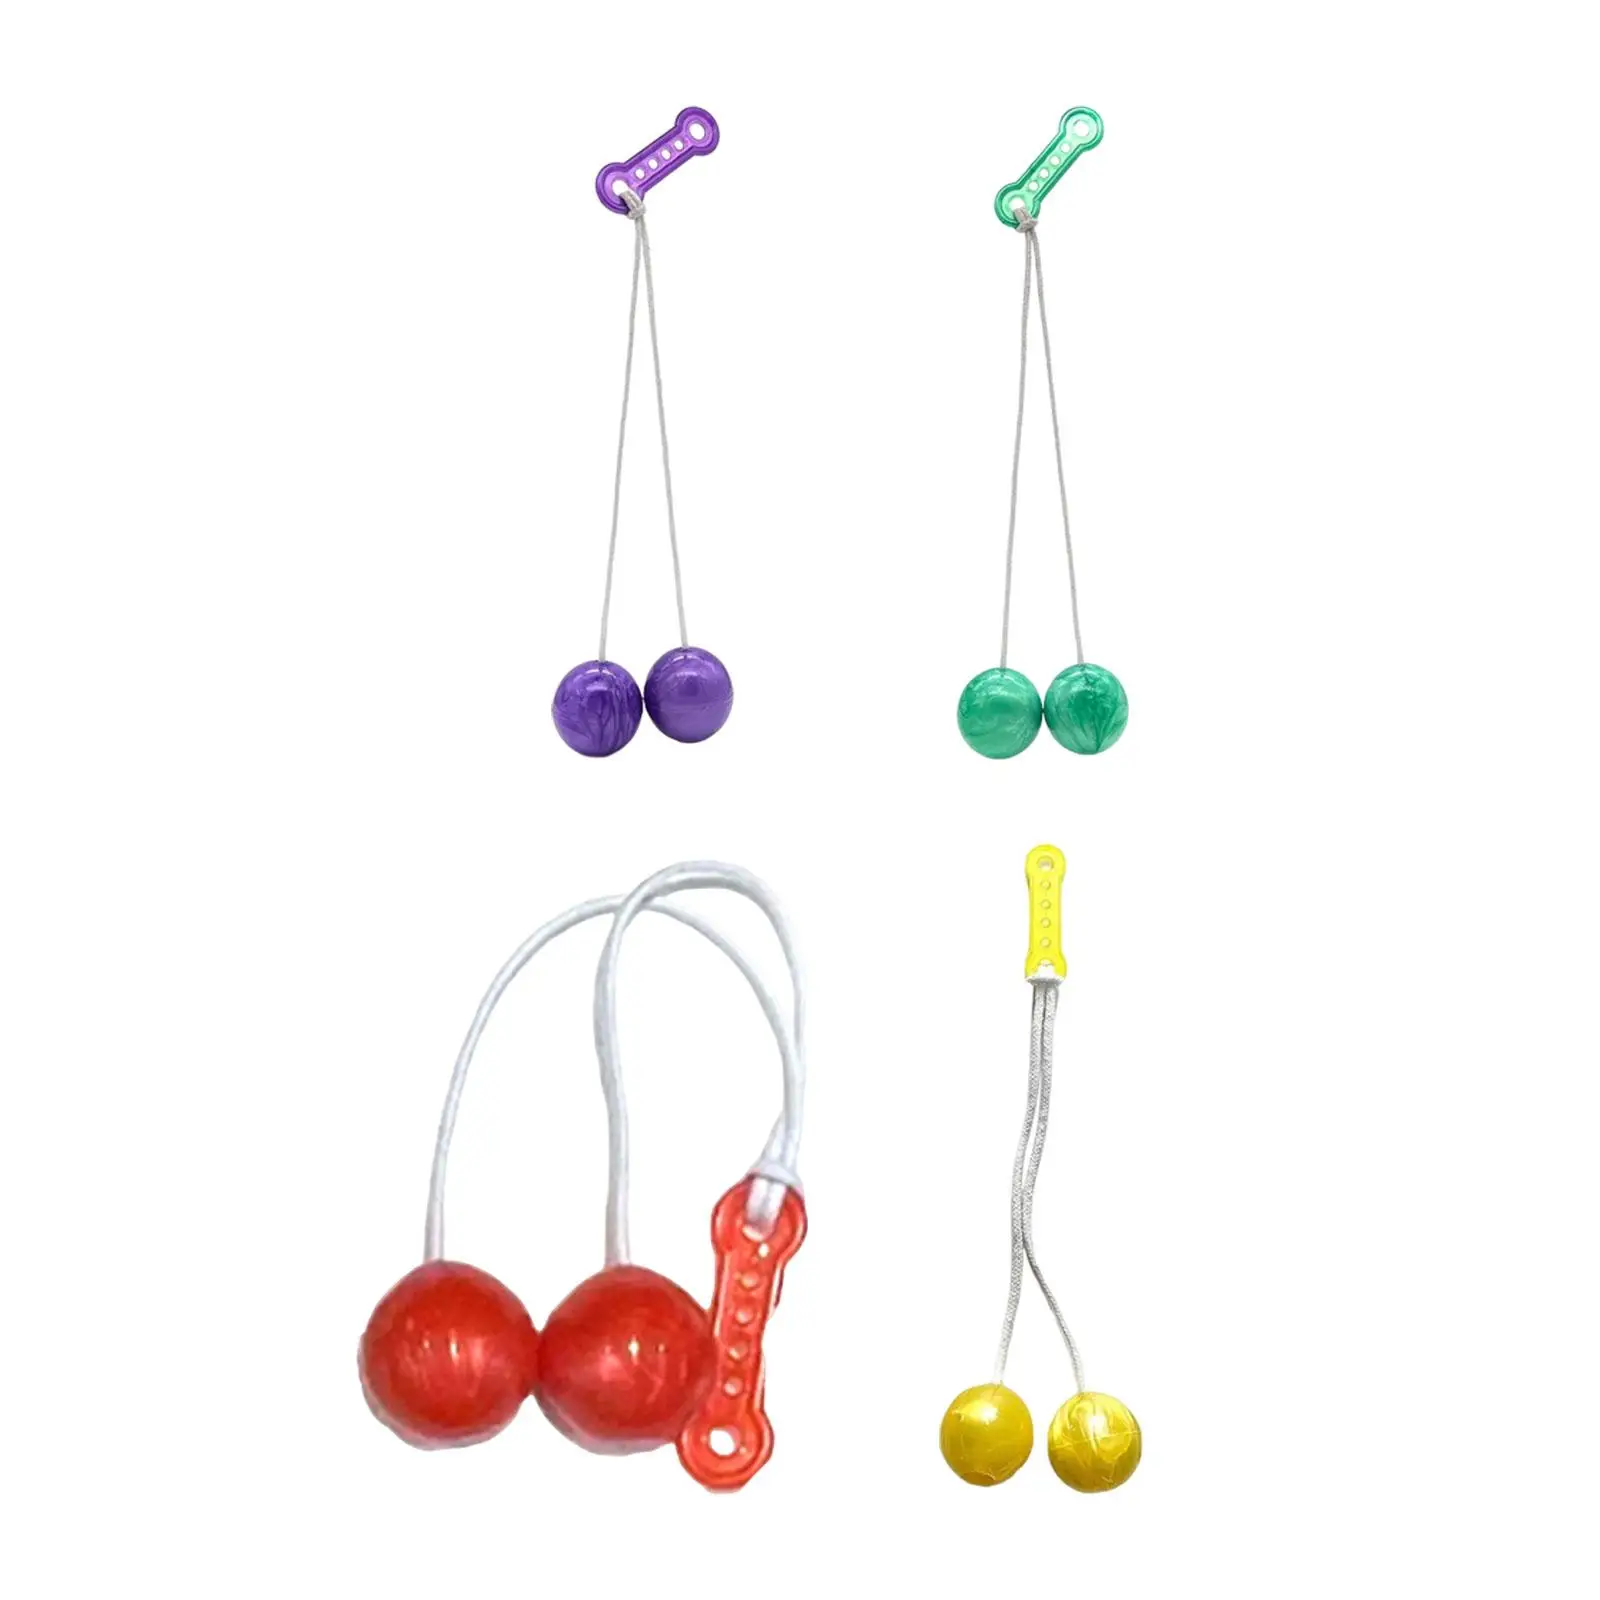 

Creative Swing Bump Ball Toy Develop Hands On Abilities for Holiday Gifts Easter Basket Stuffers